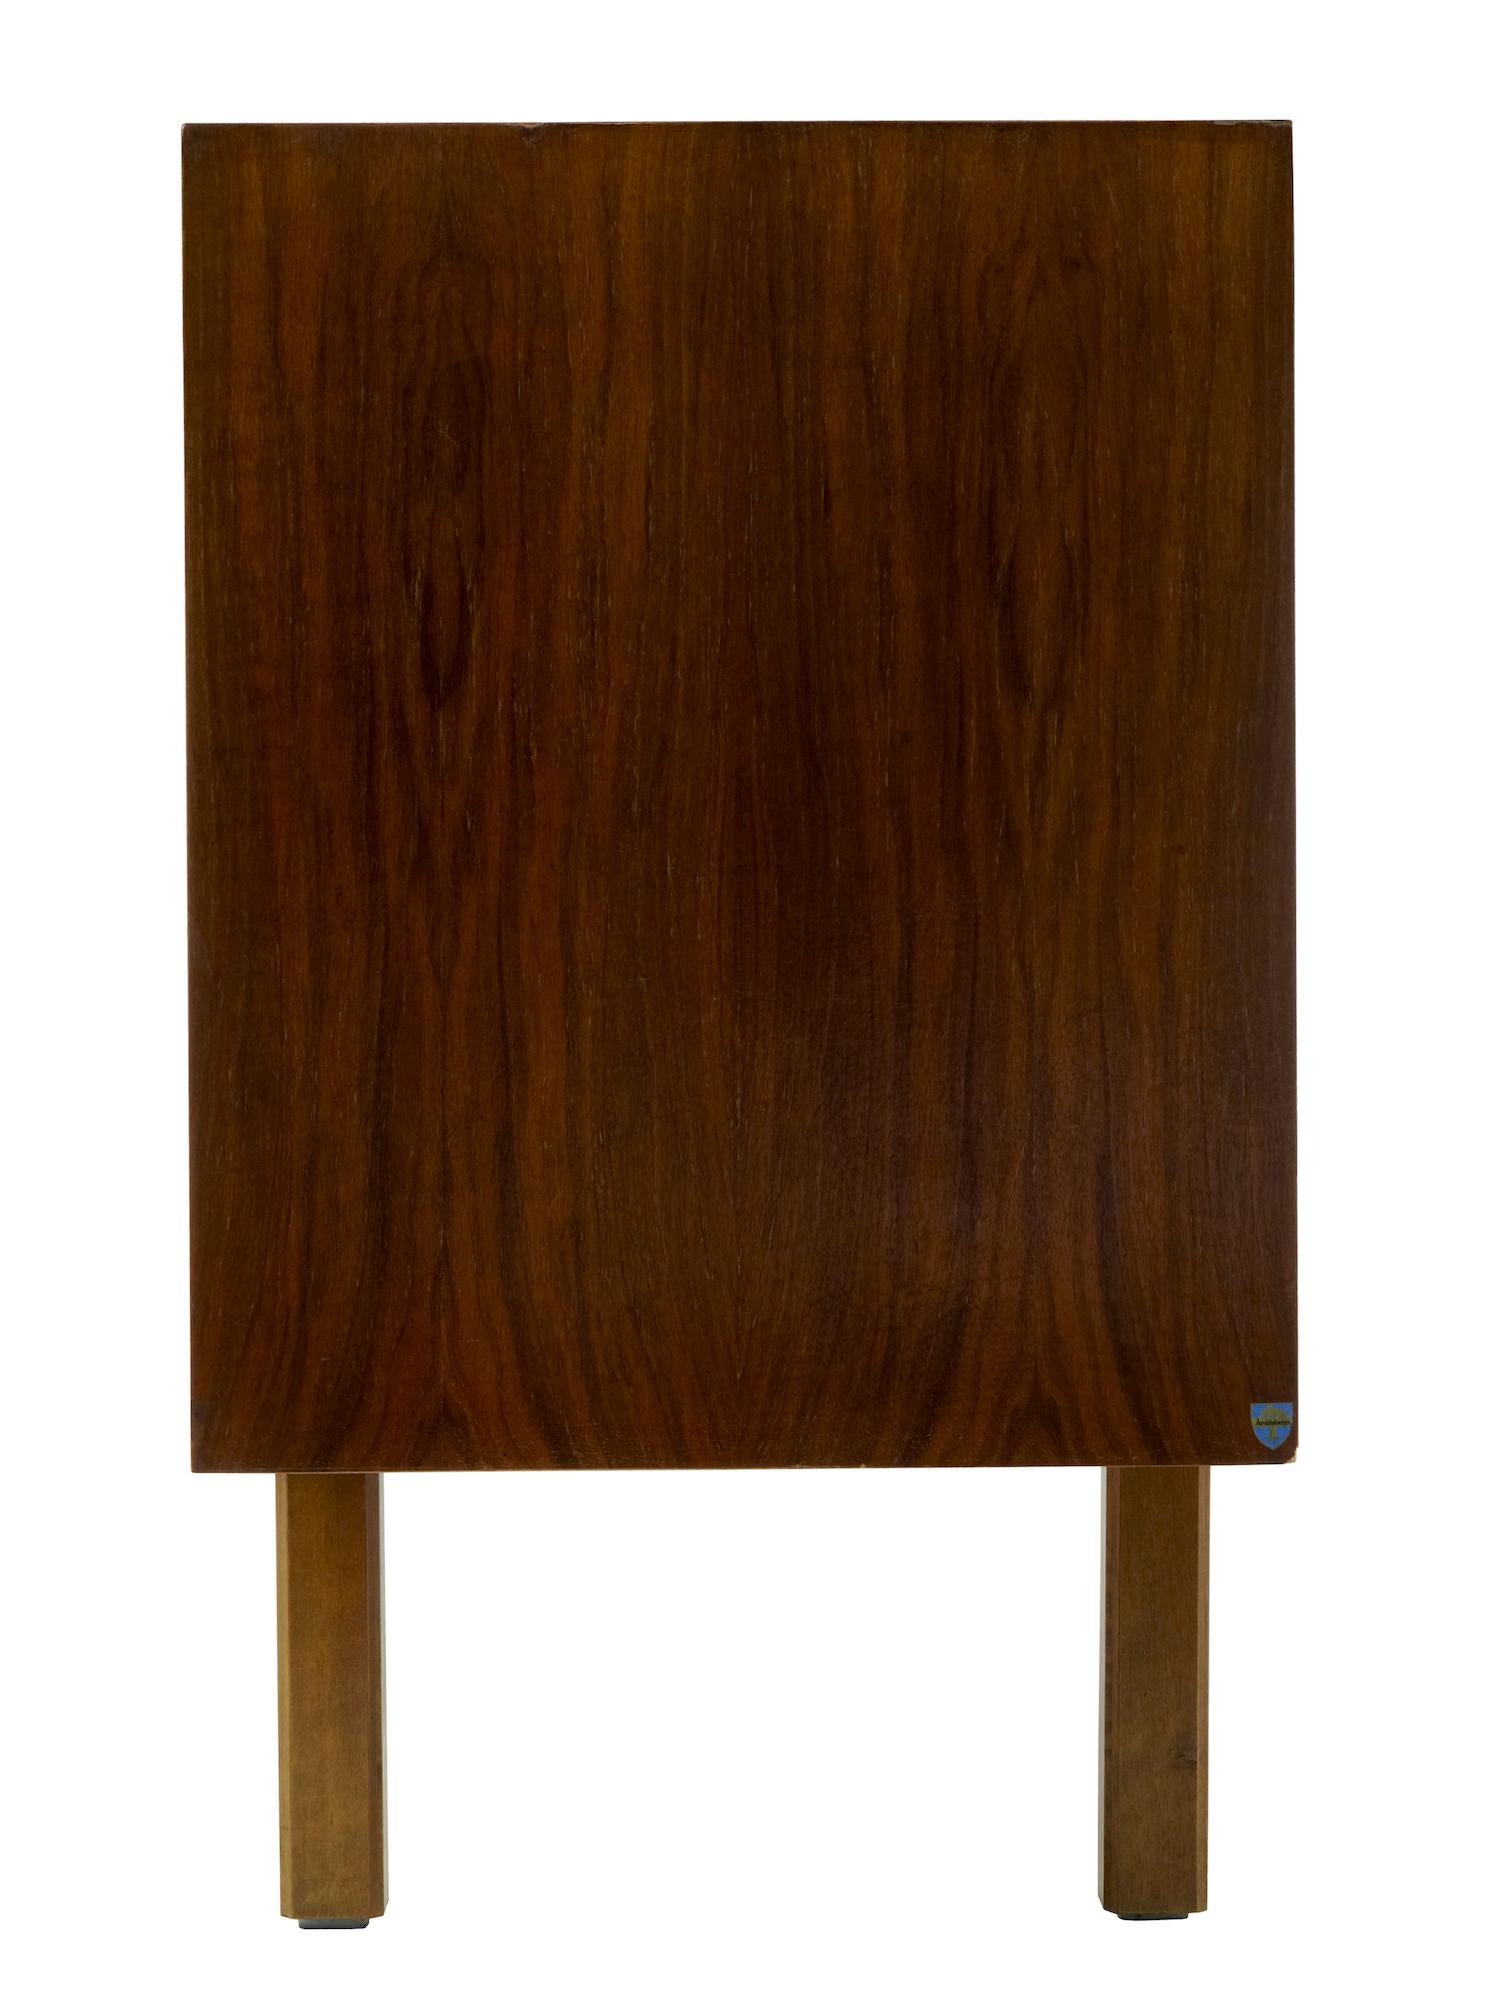 Hand-Crafted 20th Century Swedish Teak Tambour Front Sideboard by Atvidabergs